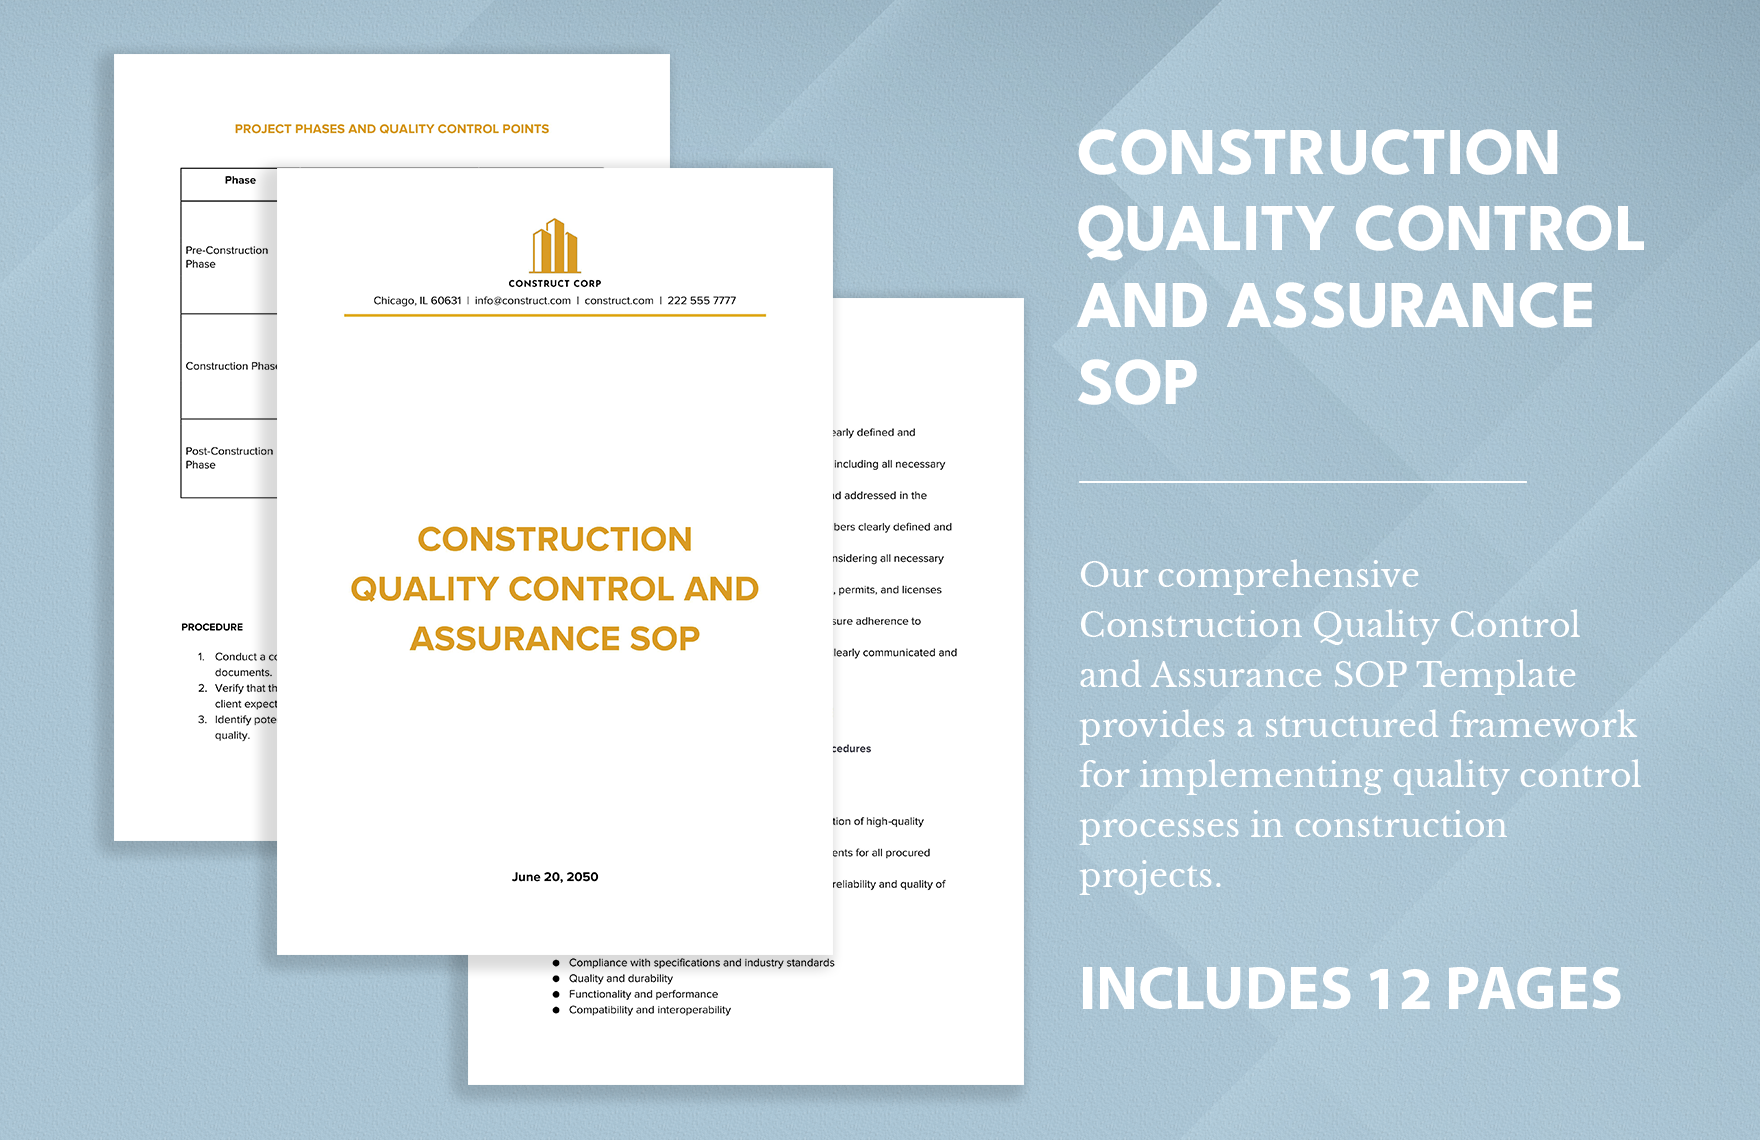 Construction Quality Control and Assurance SOP